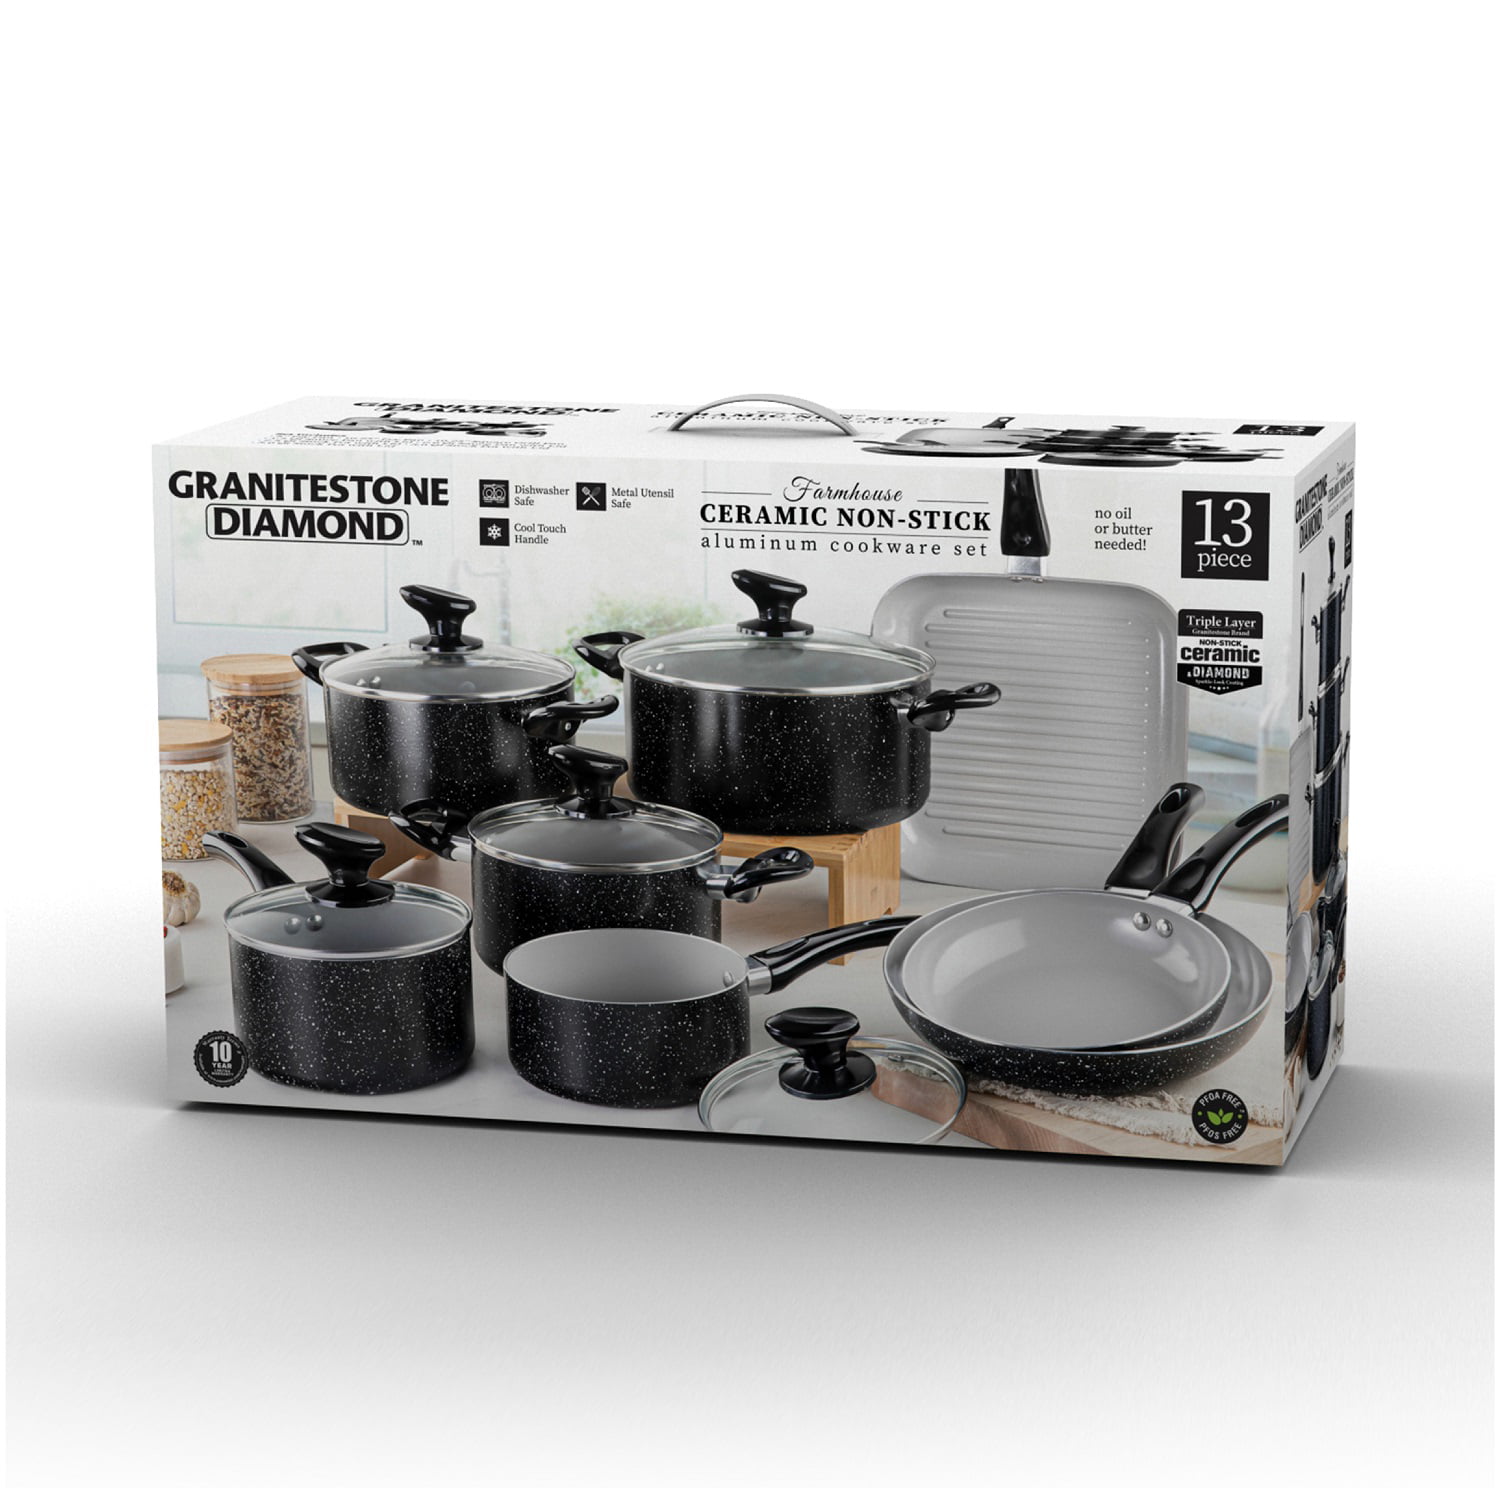 VIRAL COOKWARE SETS ON SALE!! 🔥 🍳Carote Granite Cookware Sets as Low as  $34.99 (Reg. $100) 🔗 LINK IN BIO @thefreebieguy - click the…